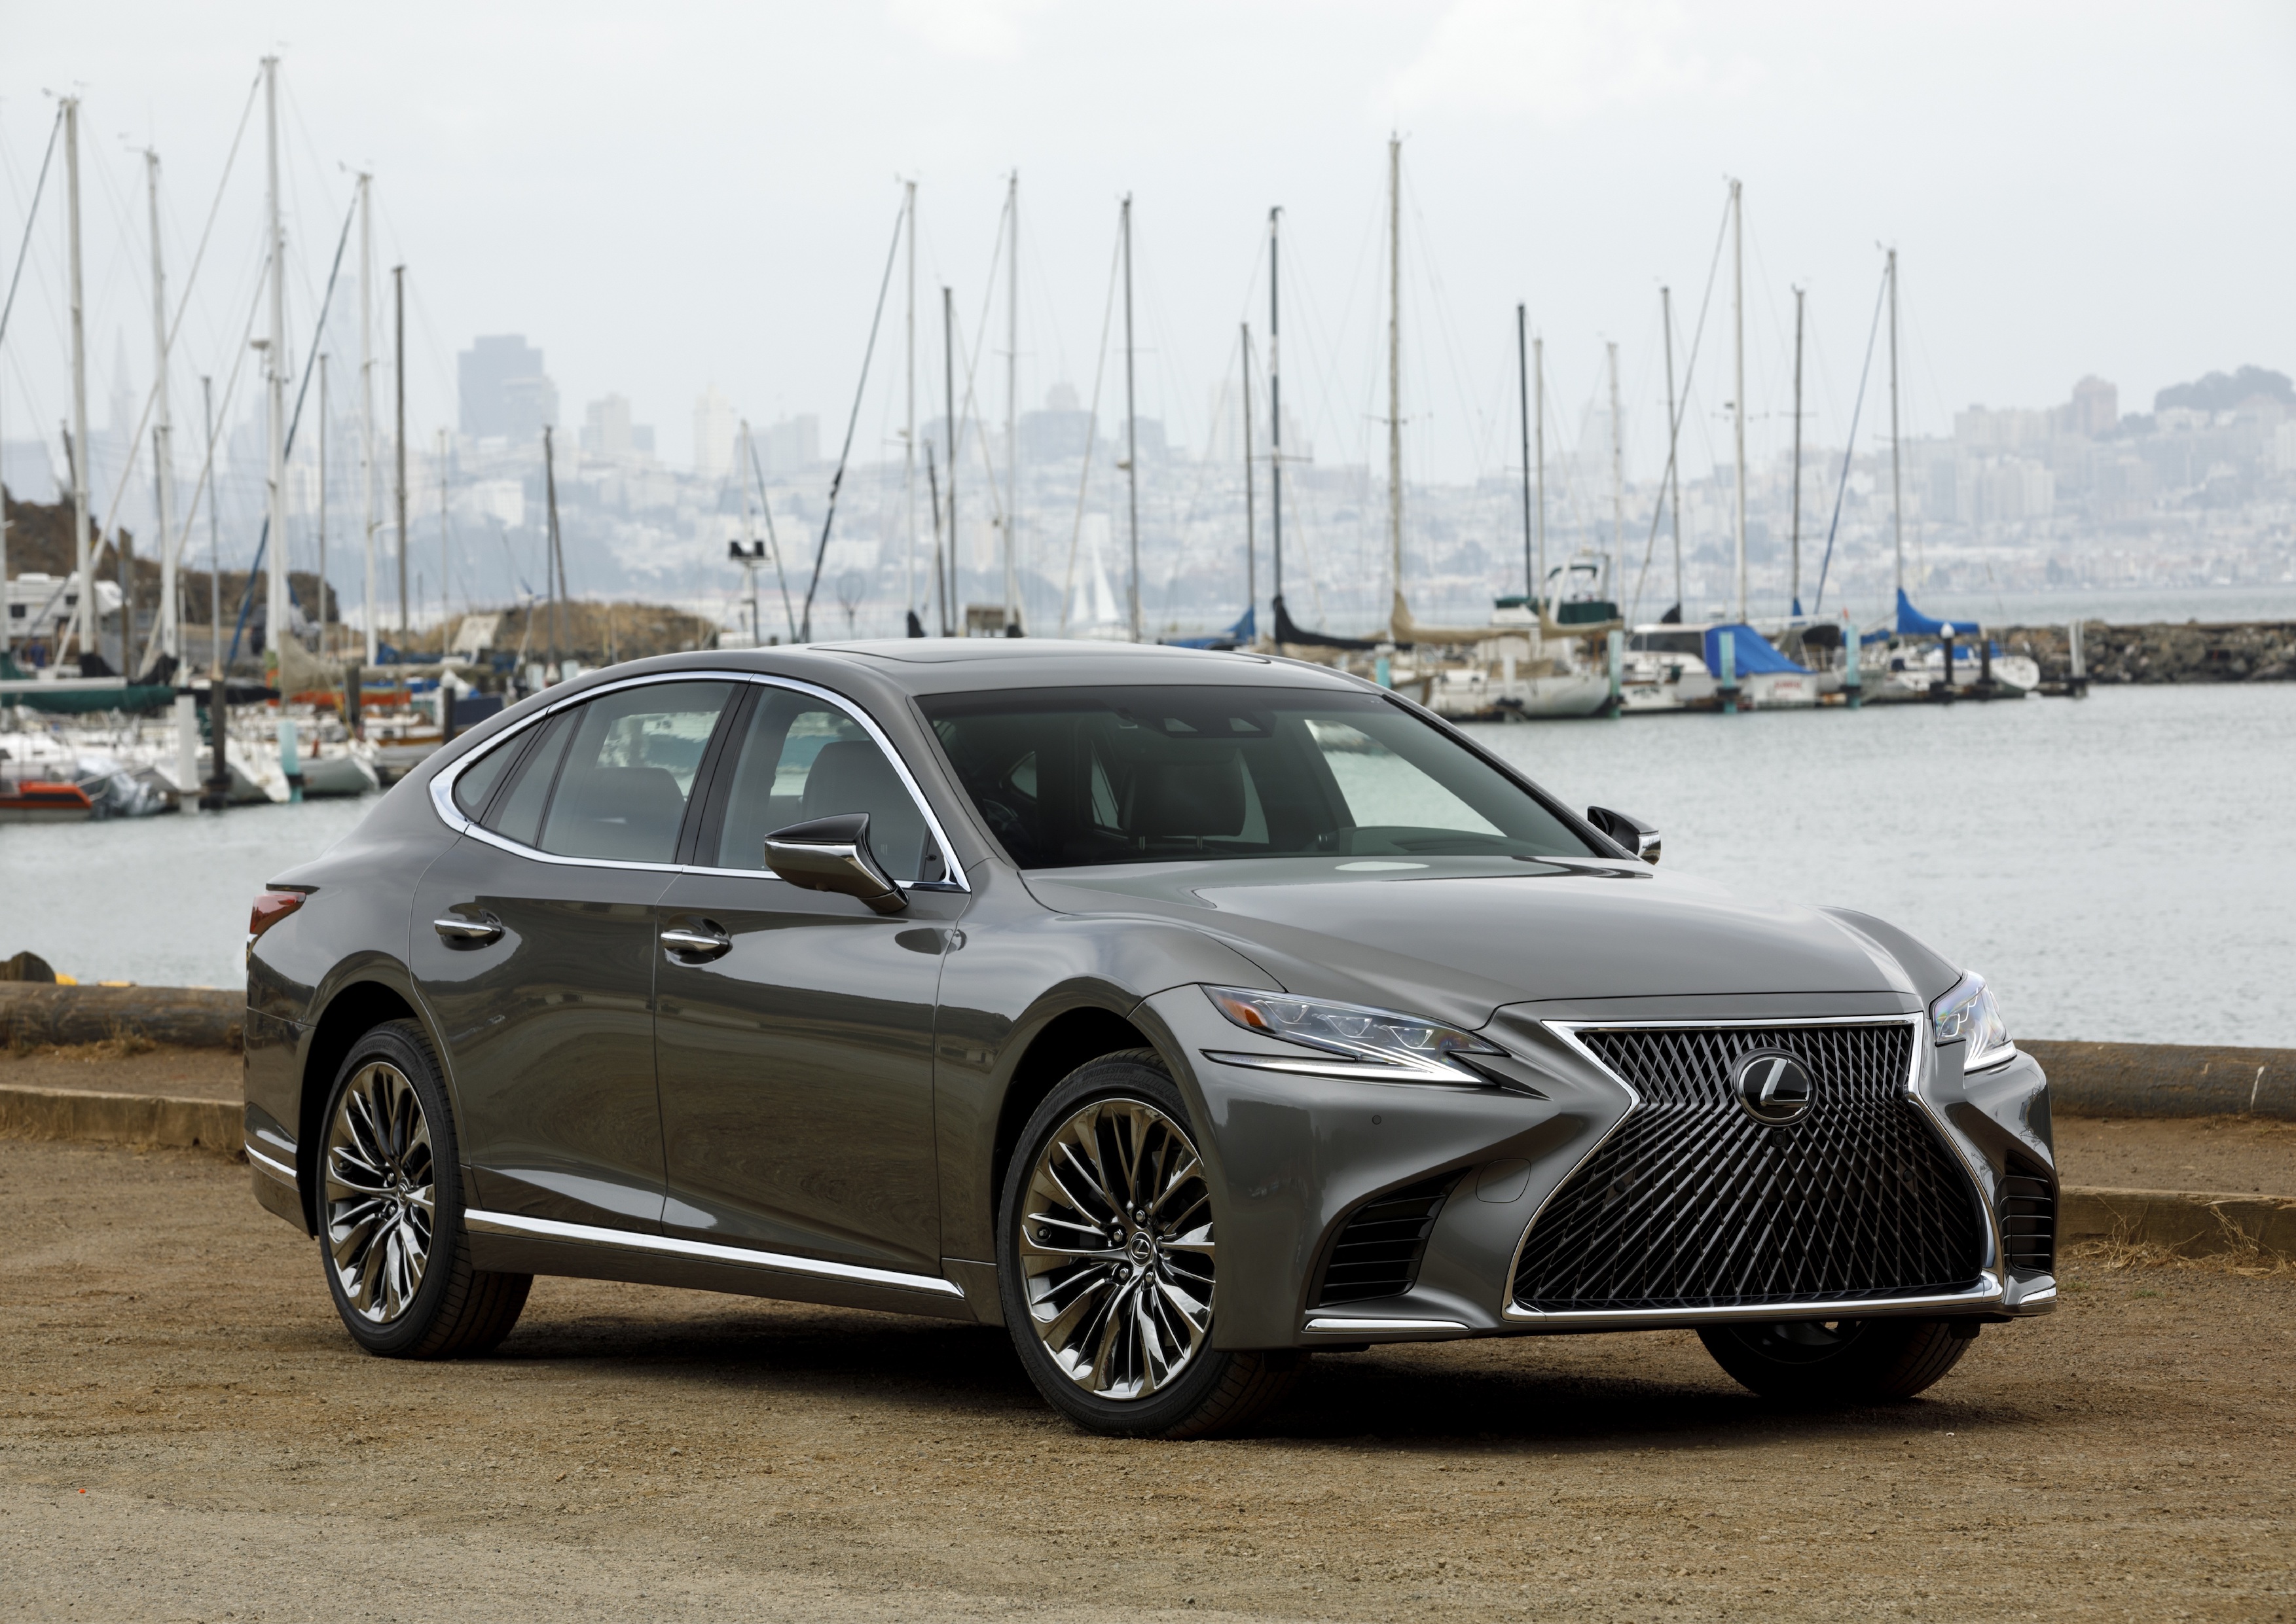 With The All-New 2018 LS, Lexus Reimagines Its Global Flagship Sedan